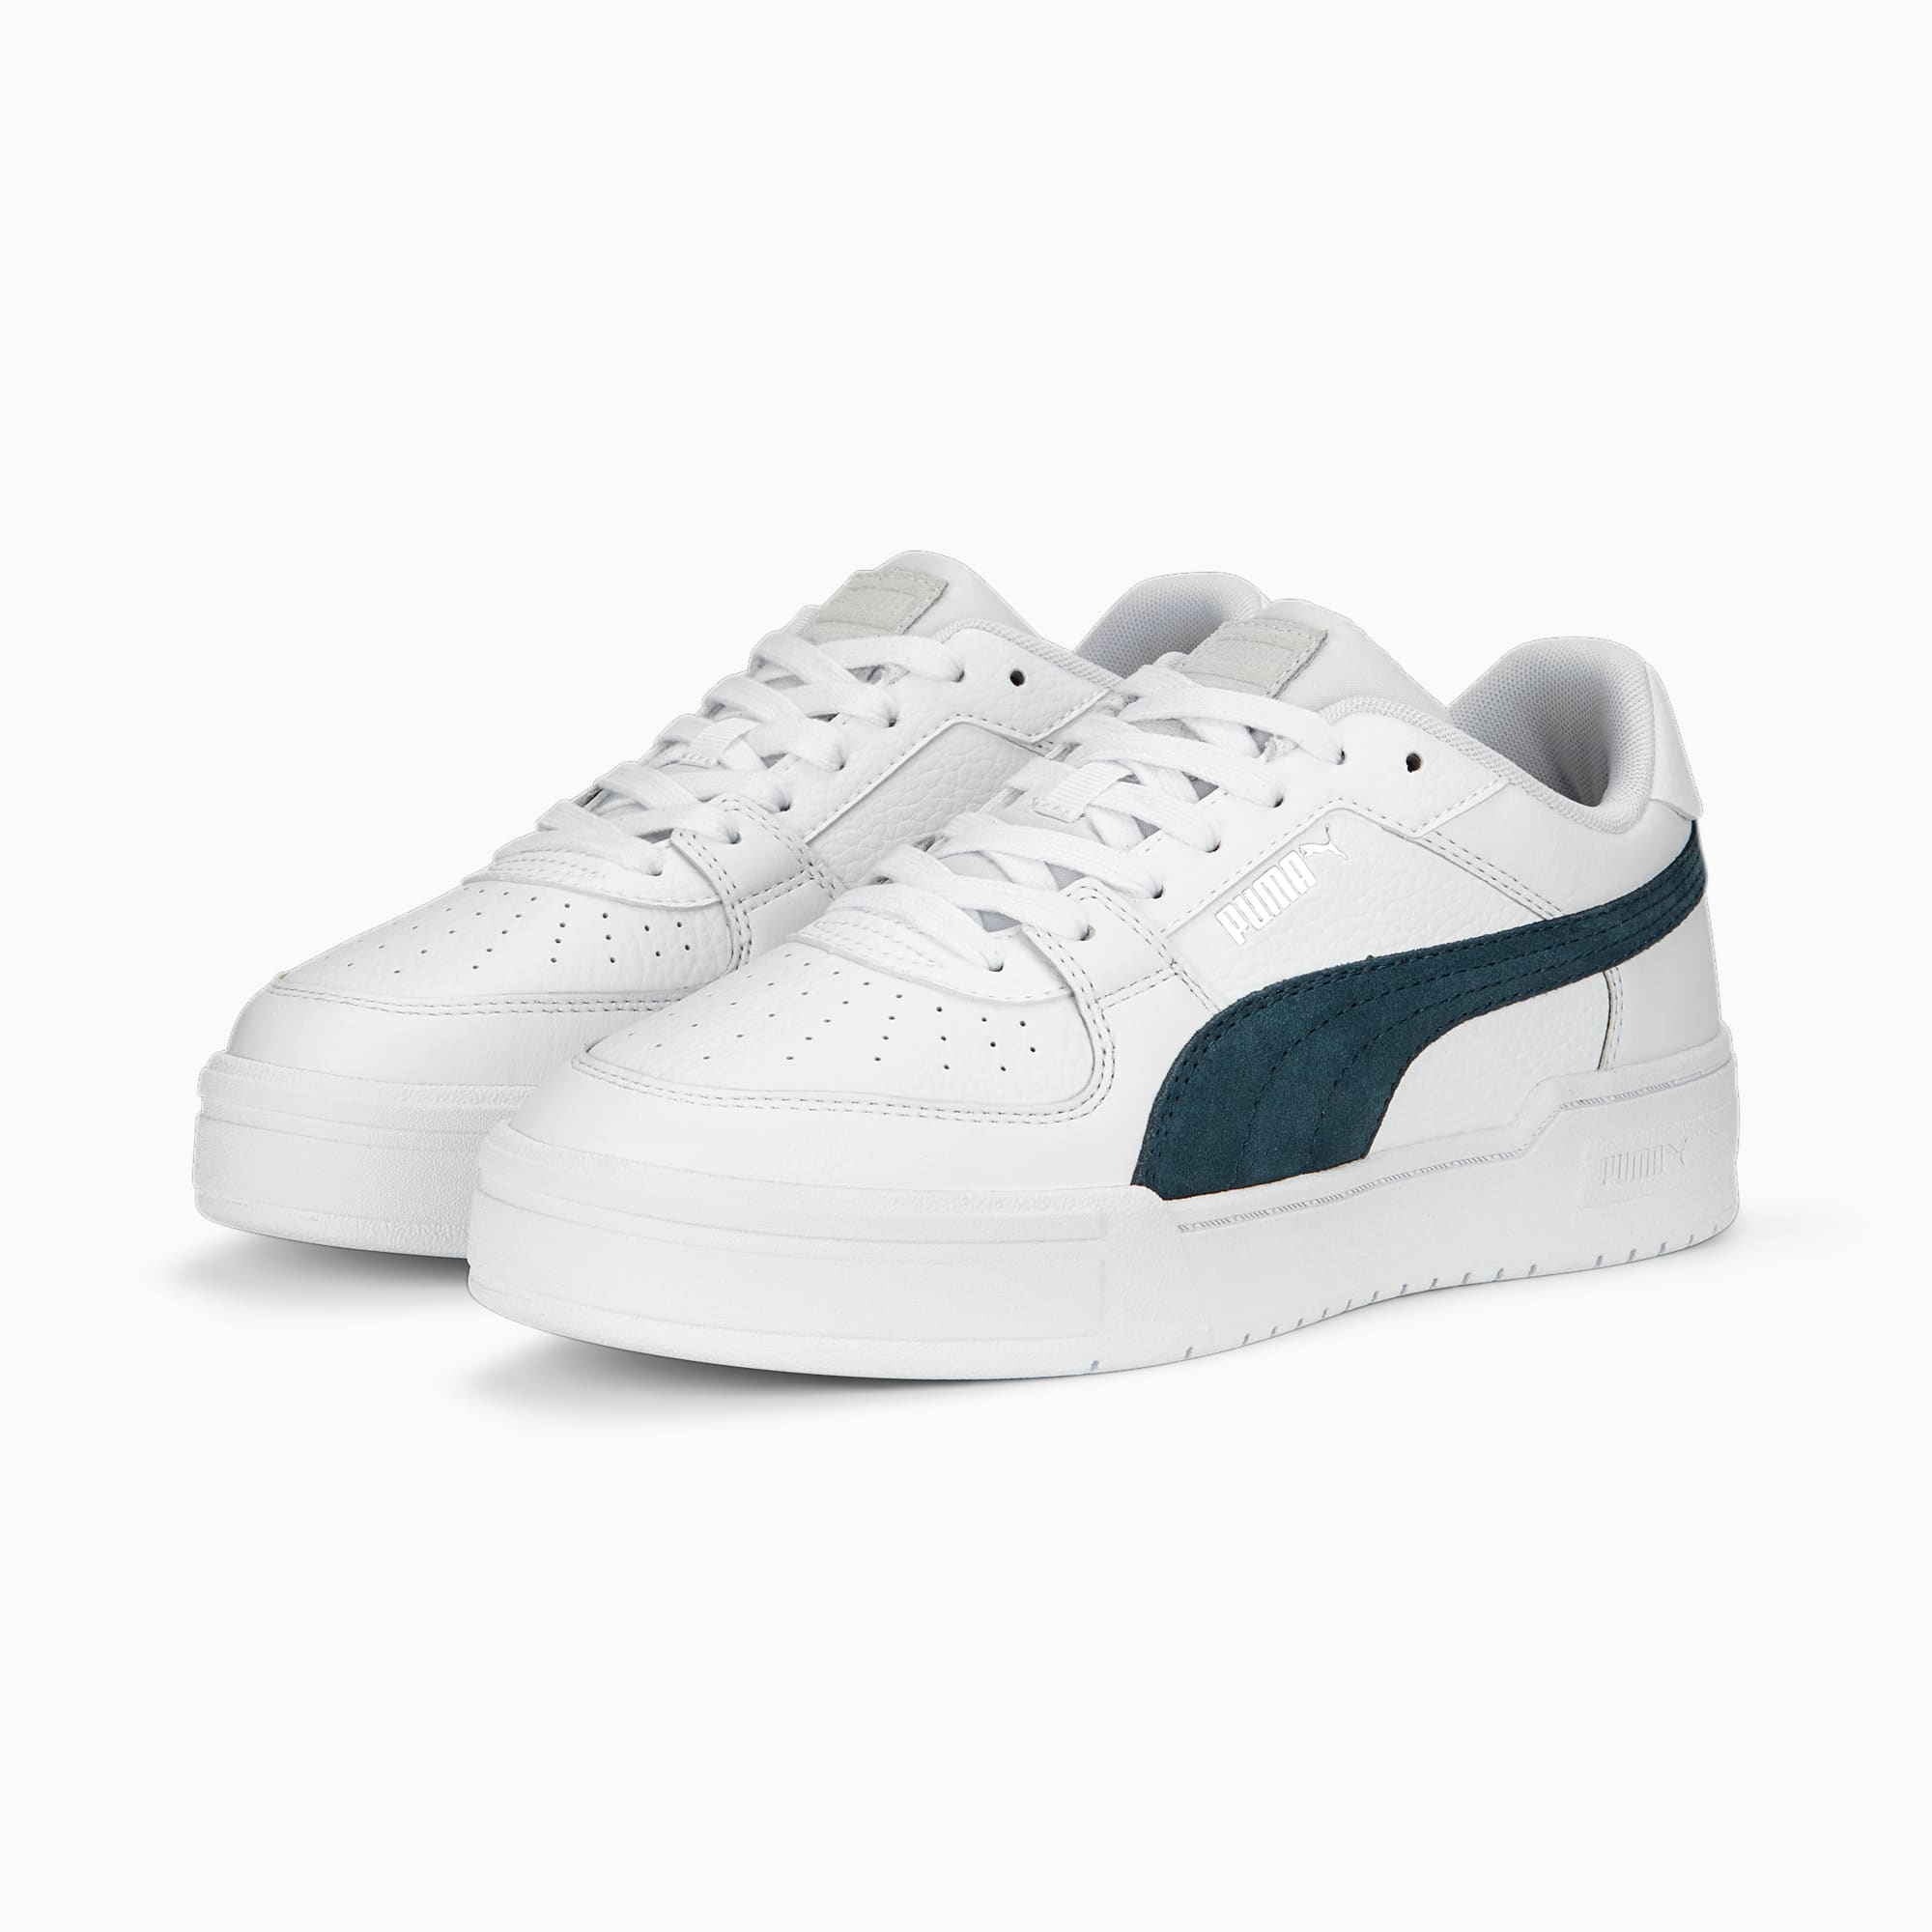 PUMA Chaussure Sneakers CA Pro Suede FS Pour Homme, Blanc